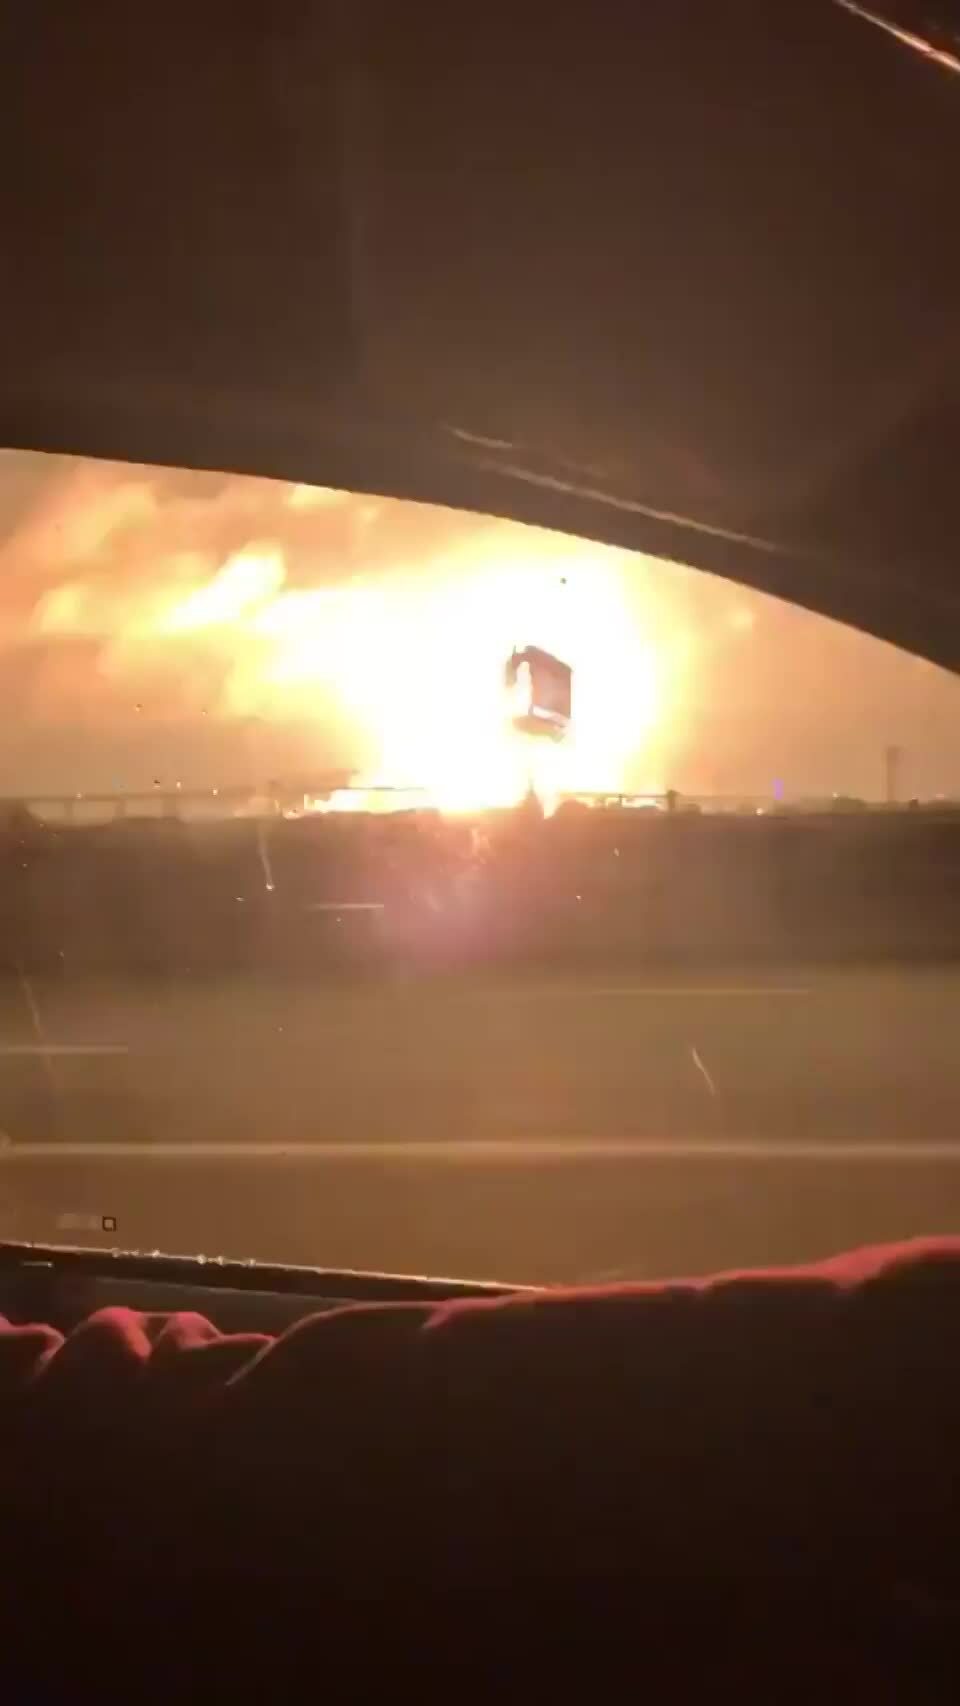 That's A Big Explosion